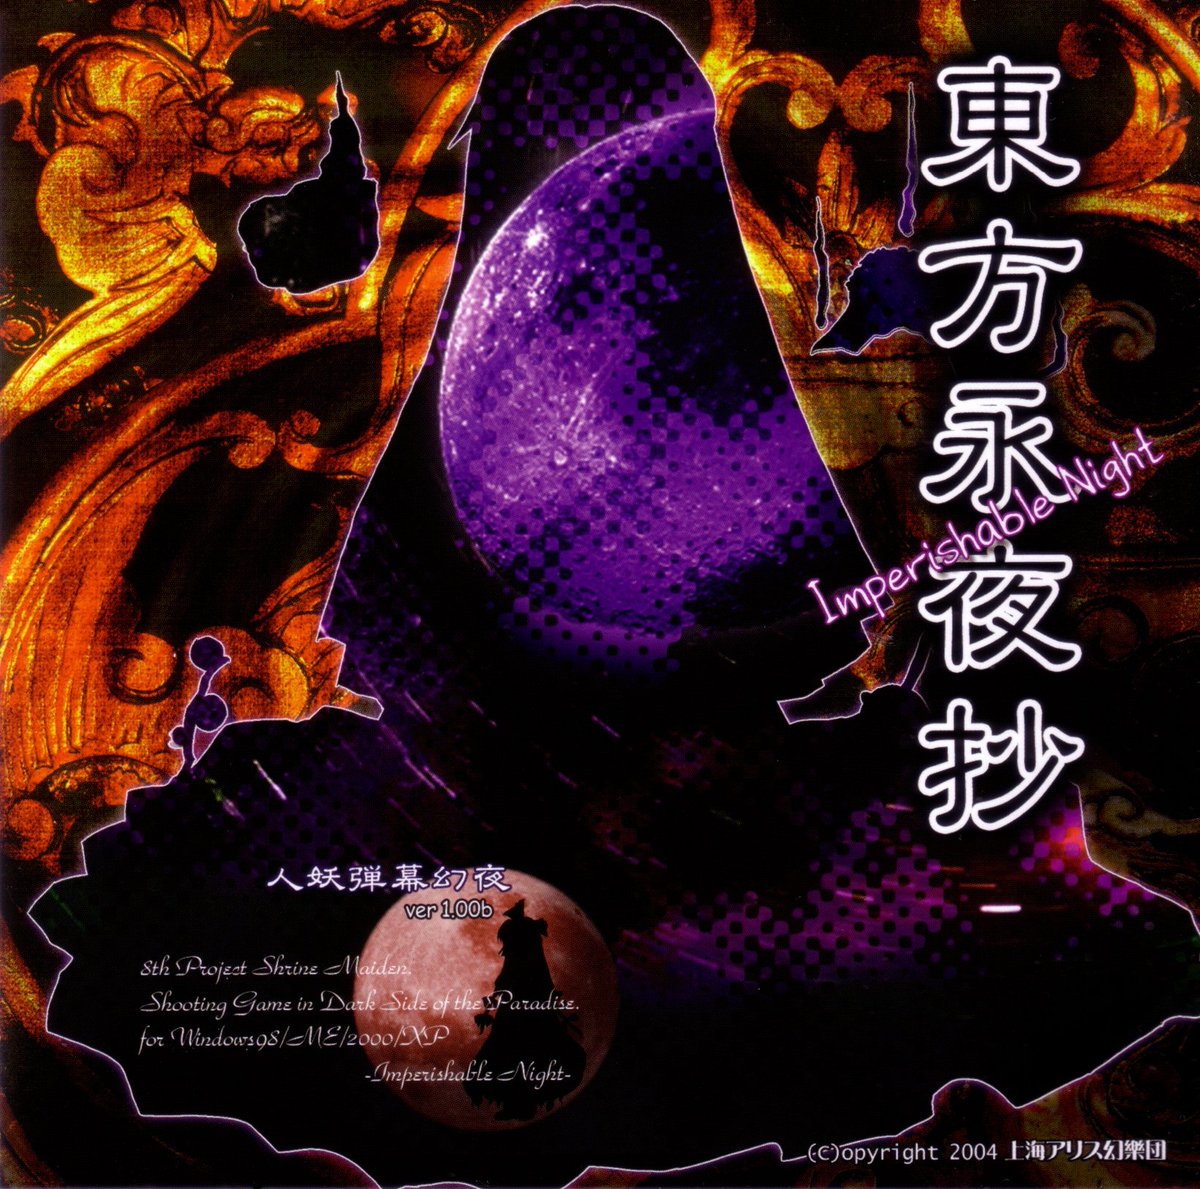 Touhou 8 Imperishable Night: This is my favorite Touhou game, and just one of my absolute favorite games in general. Replaying it reminded me of just how much I love this series.